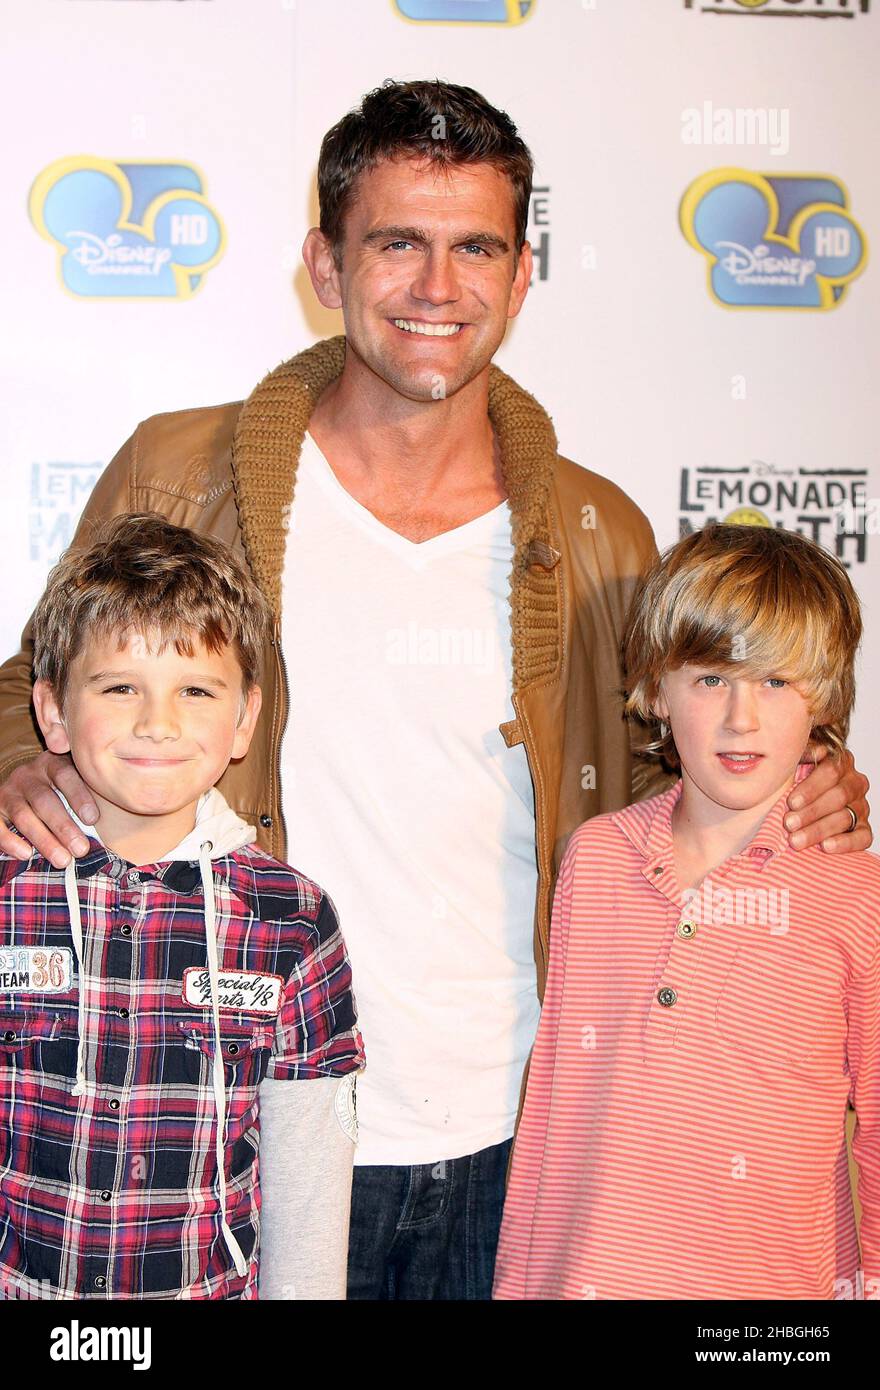 Scott Maslen and son Zak and friend arriving at the Lemonade Mouth Disney Channel Premiere at BAFTA, London. Stock Photo